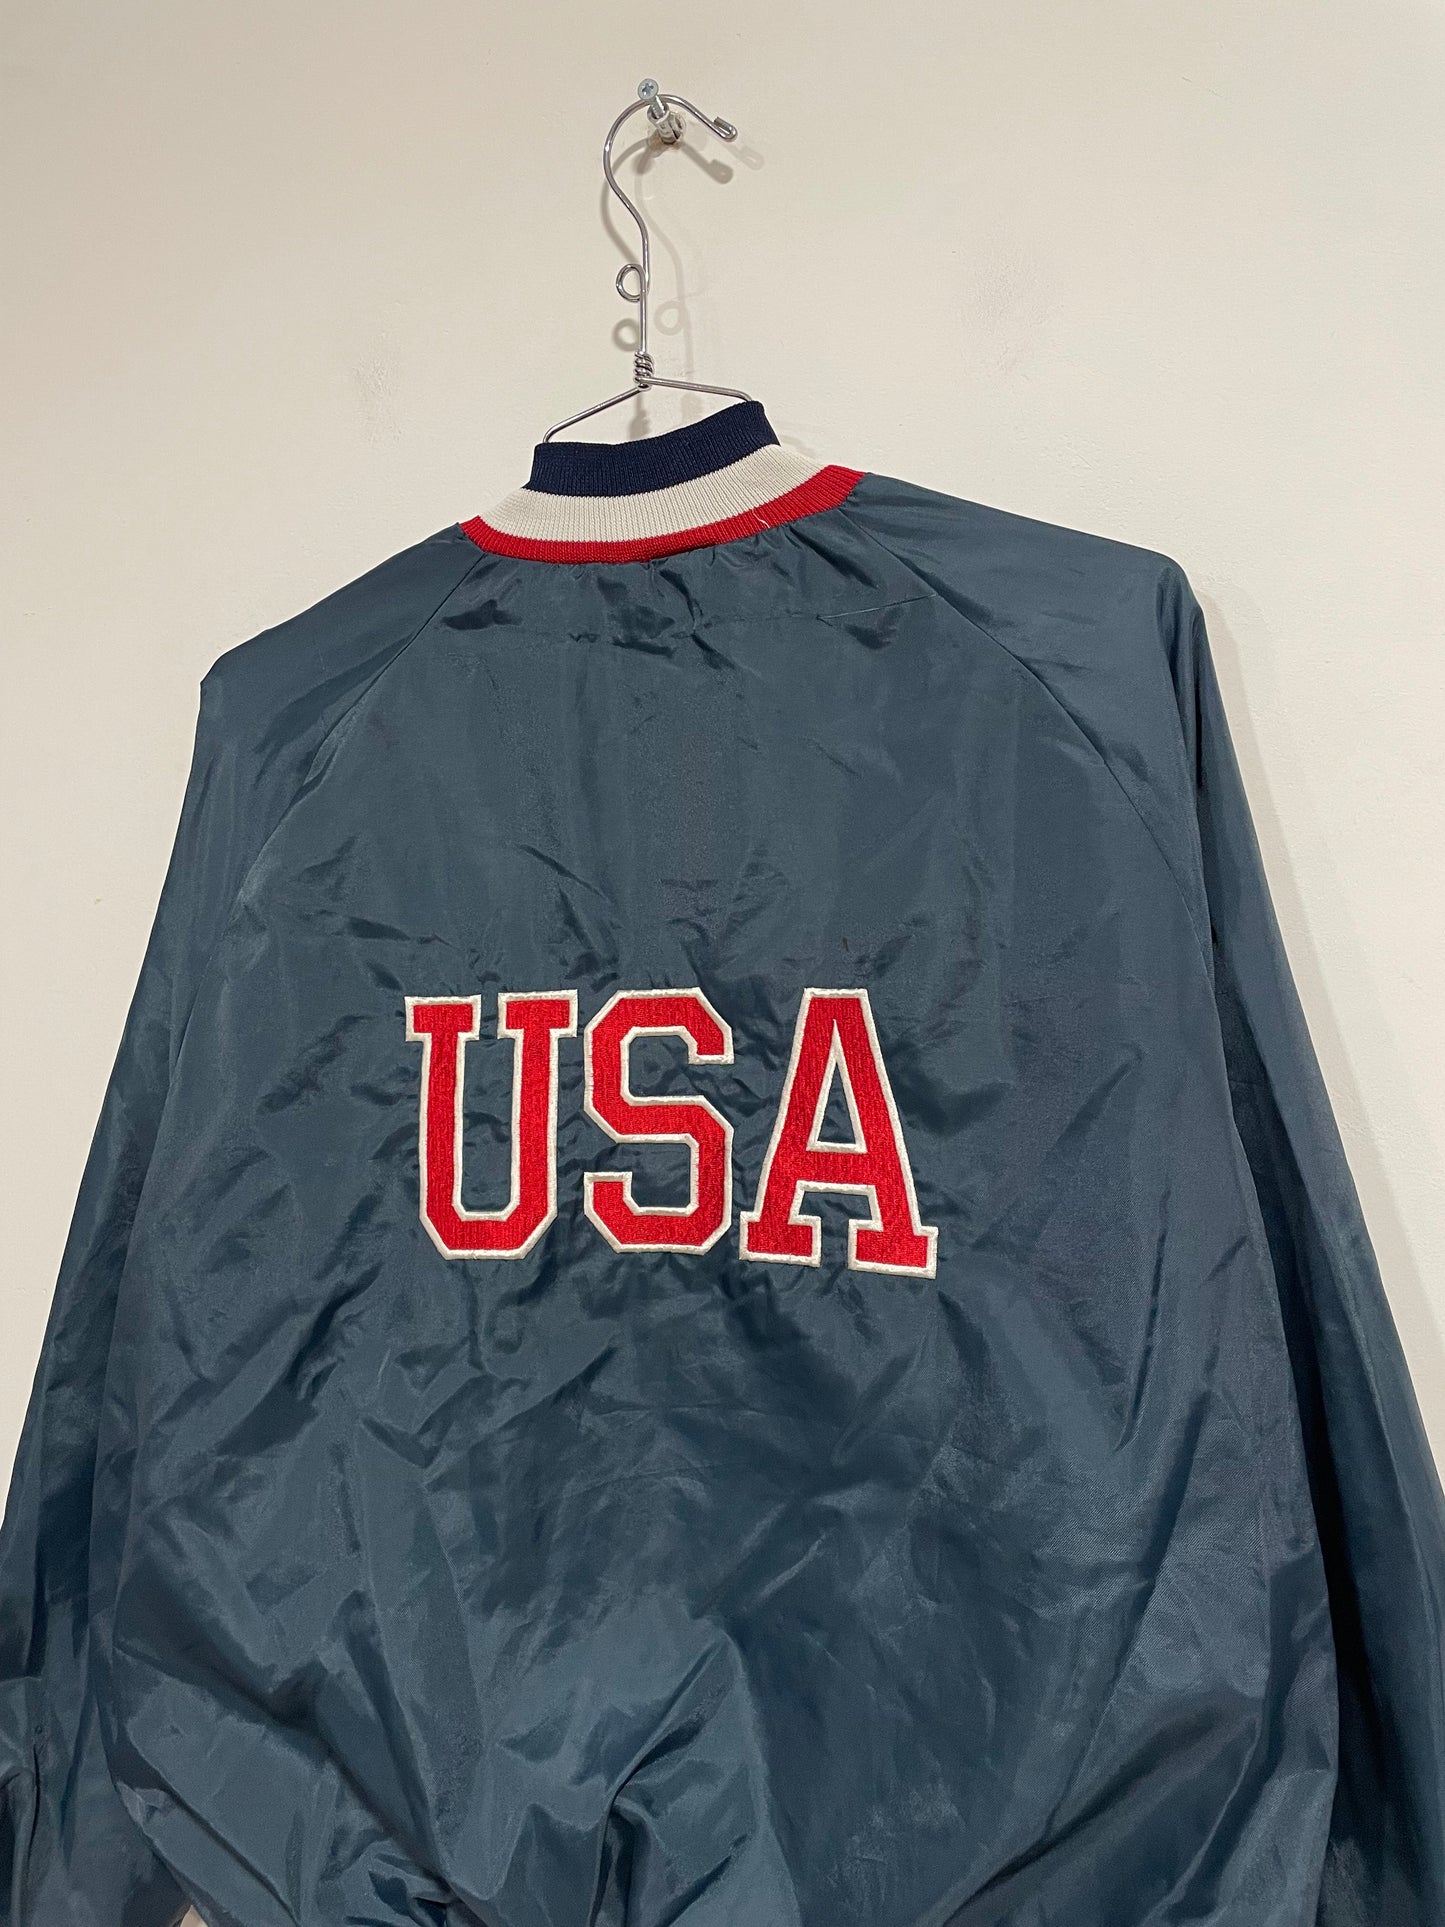 Bomberino Lee made in USA official Olympic training center (C991)